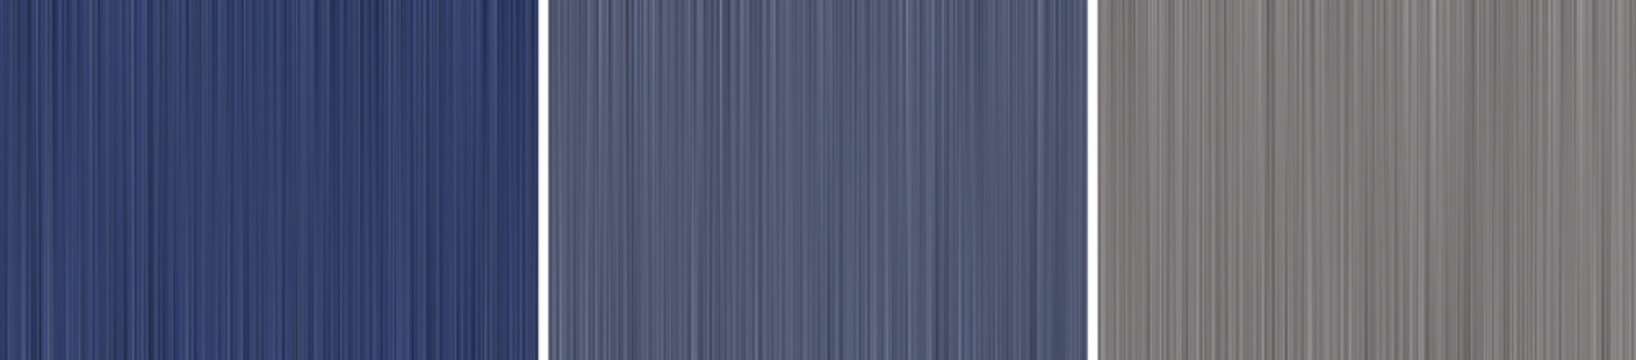 Abstract background of blue halftone blurry lines